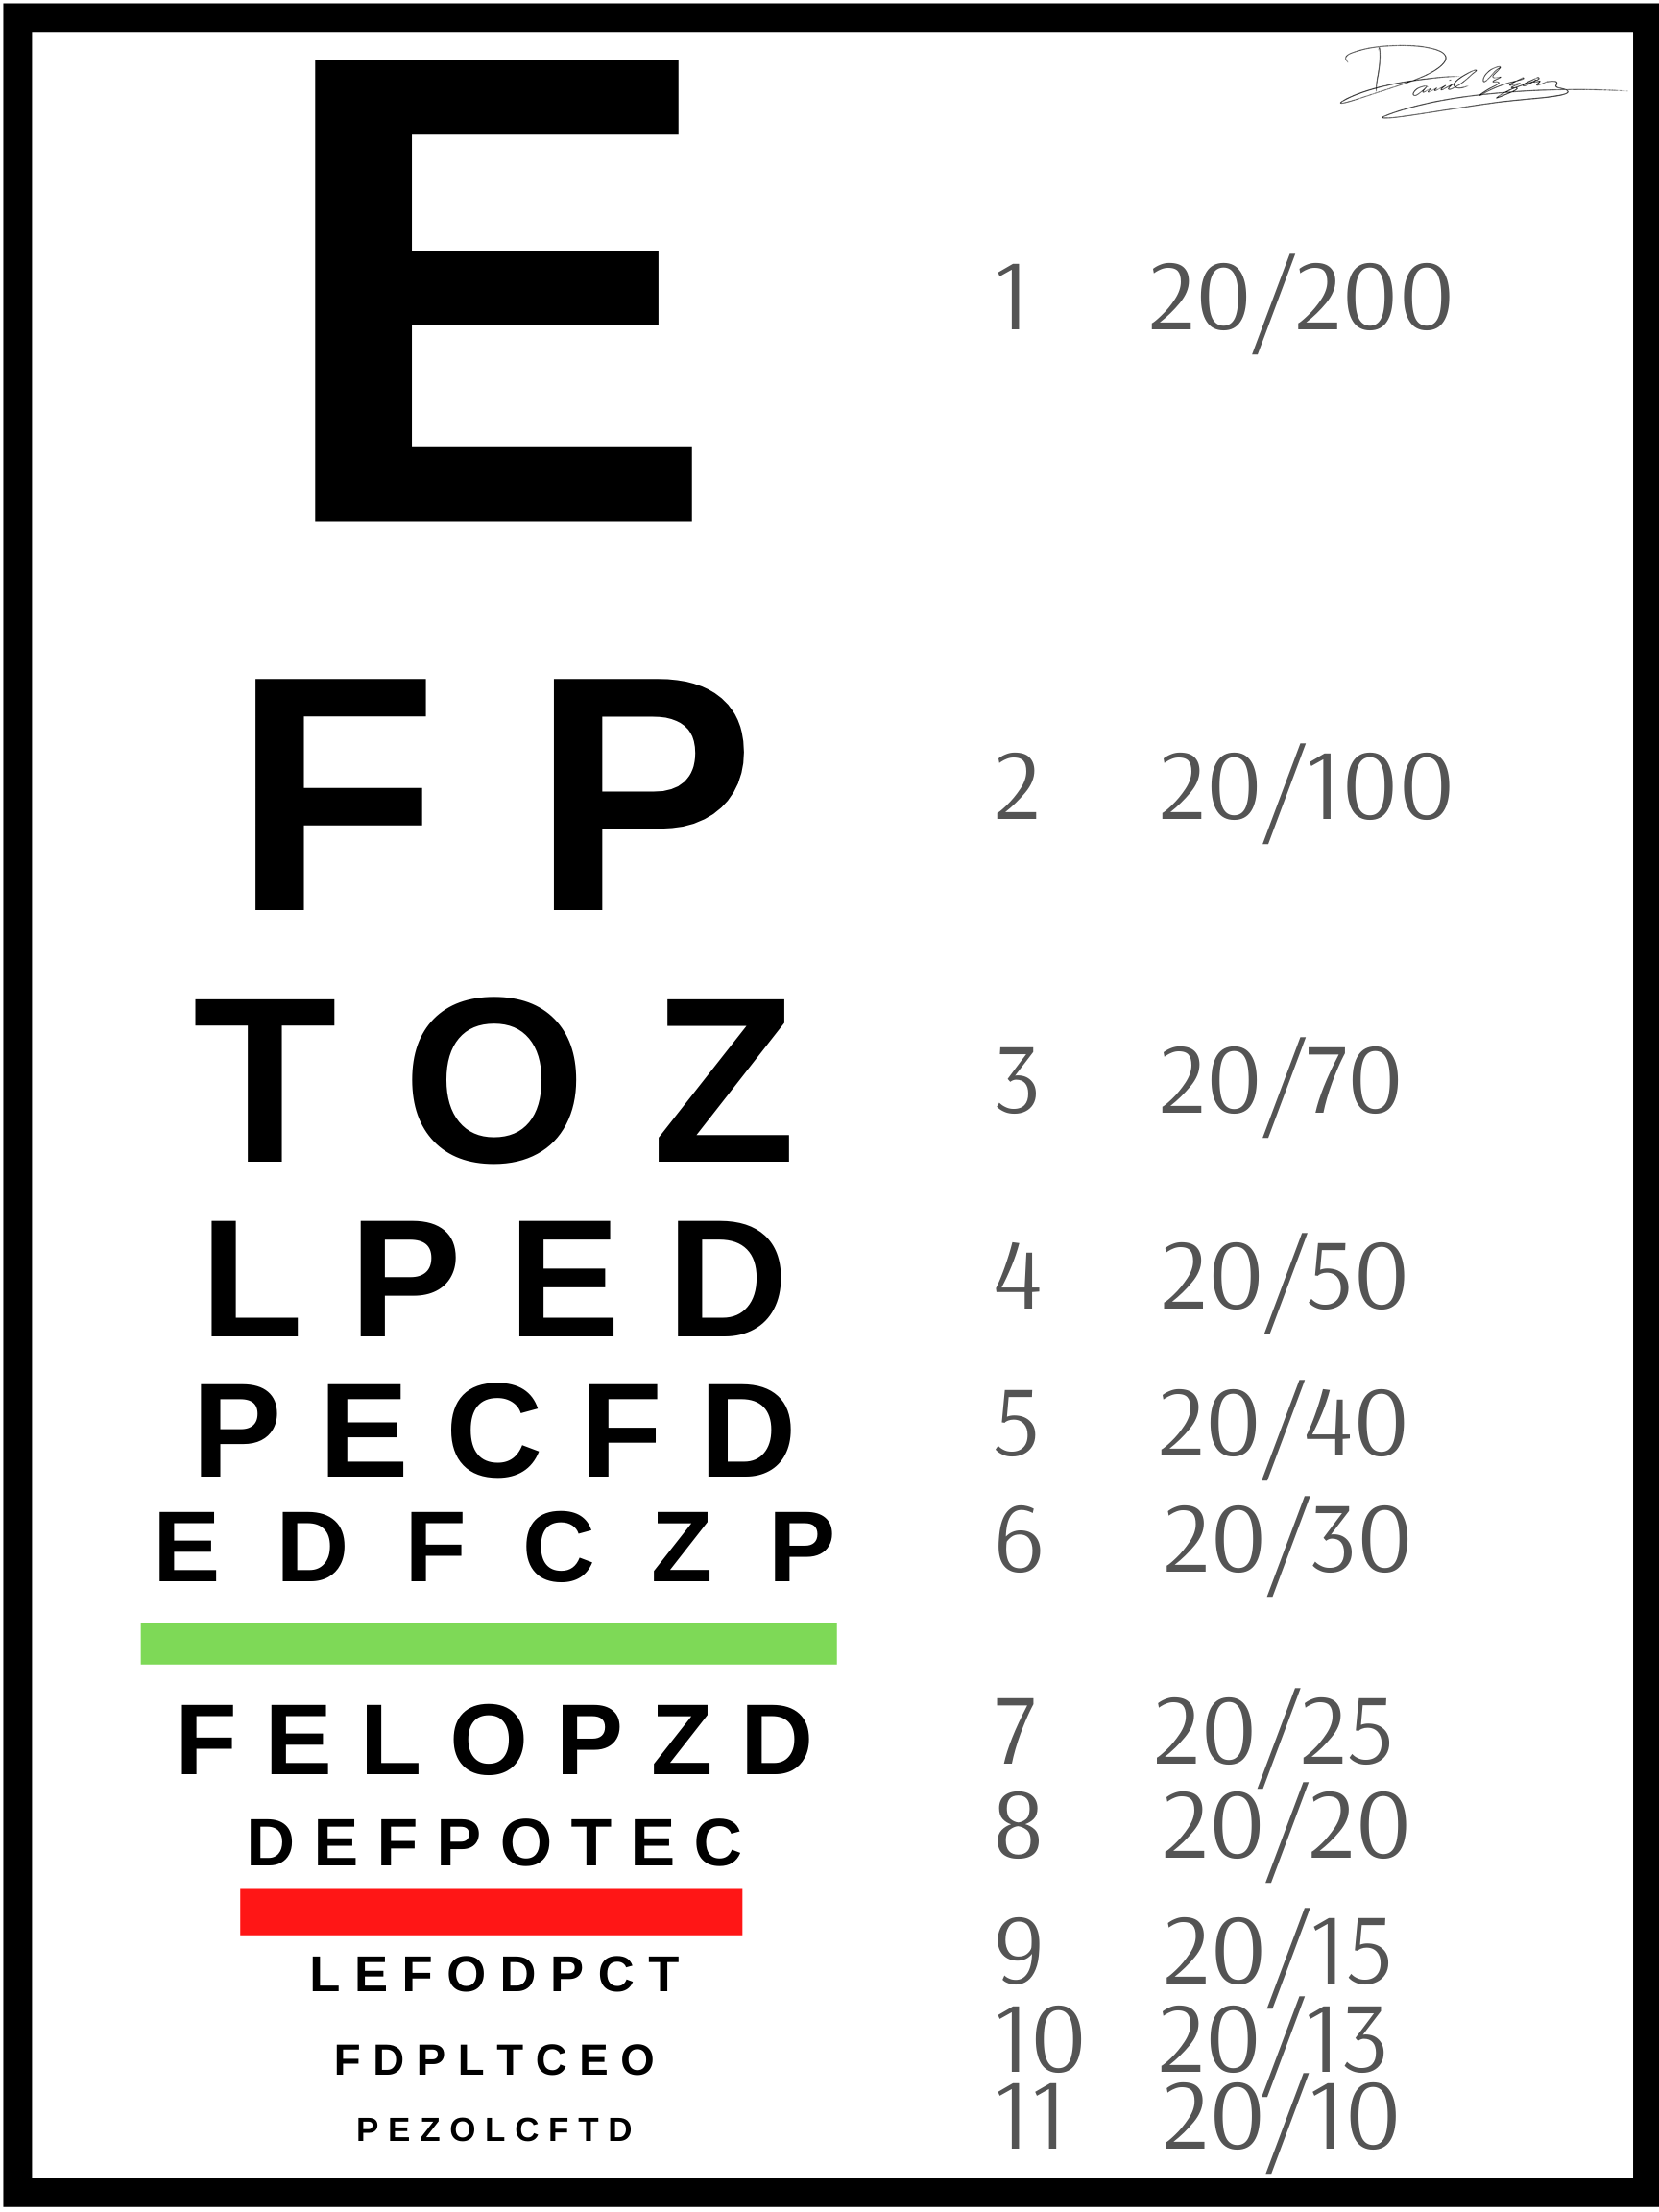 A Snellen eye chart for visual acuity testing.